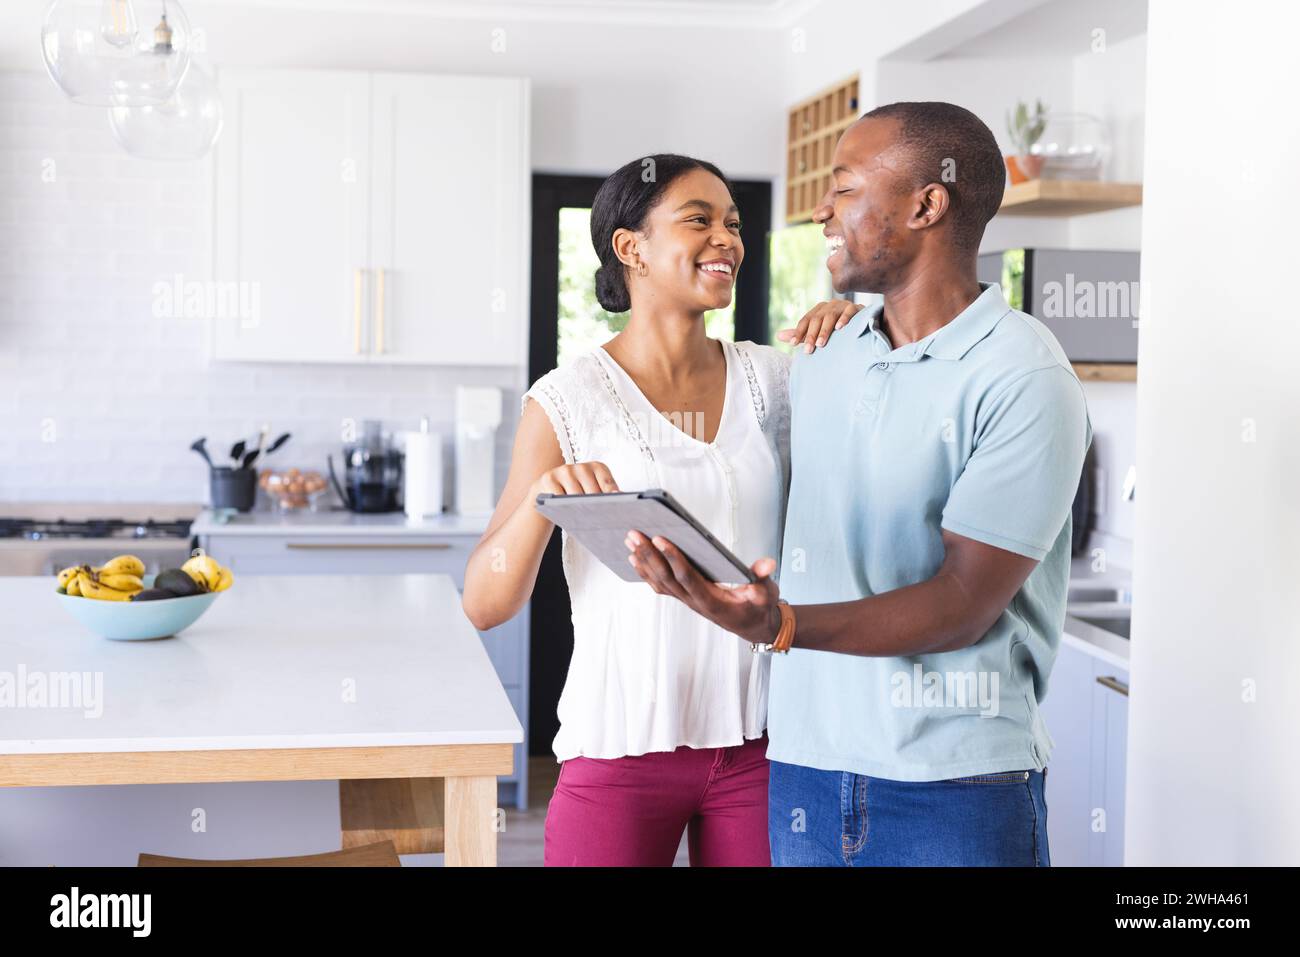 Biracial woman and African American man share a moment in the kitchen Stock Photo